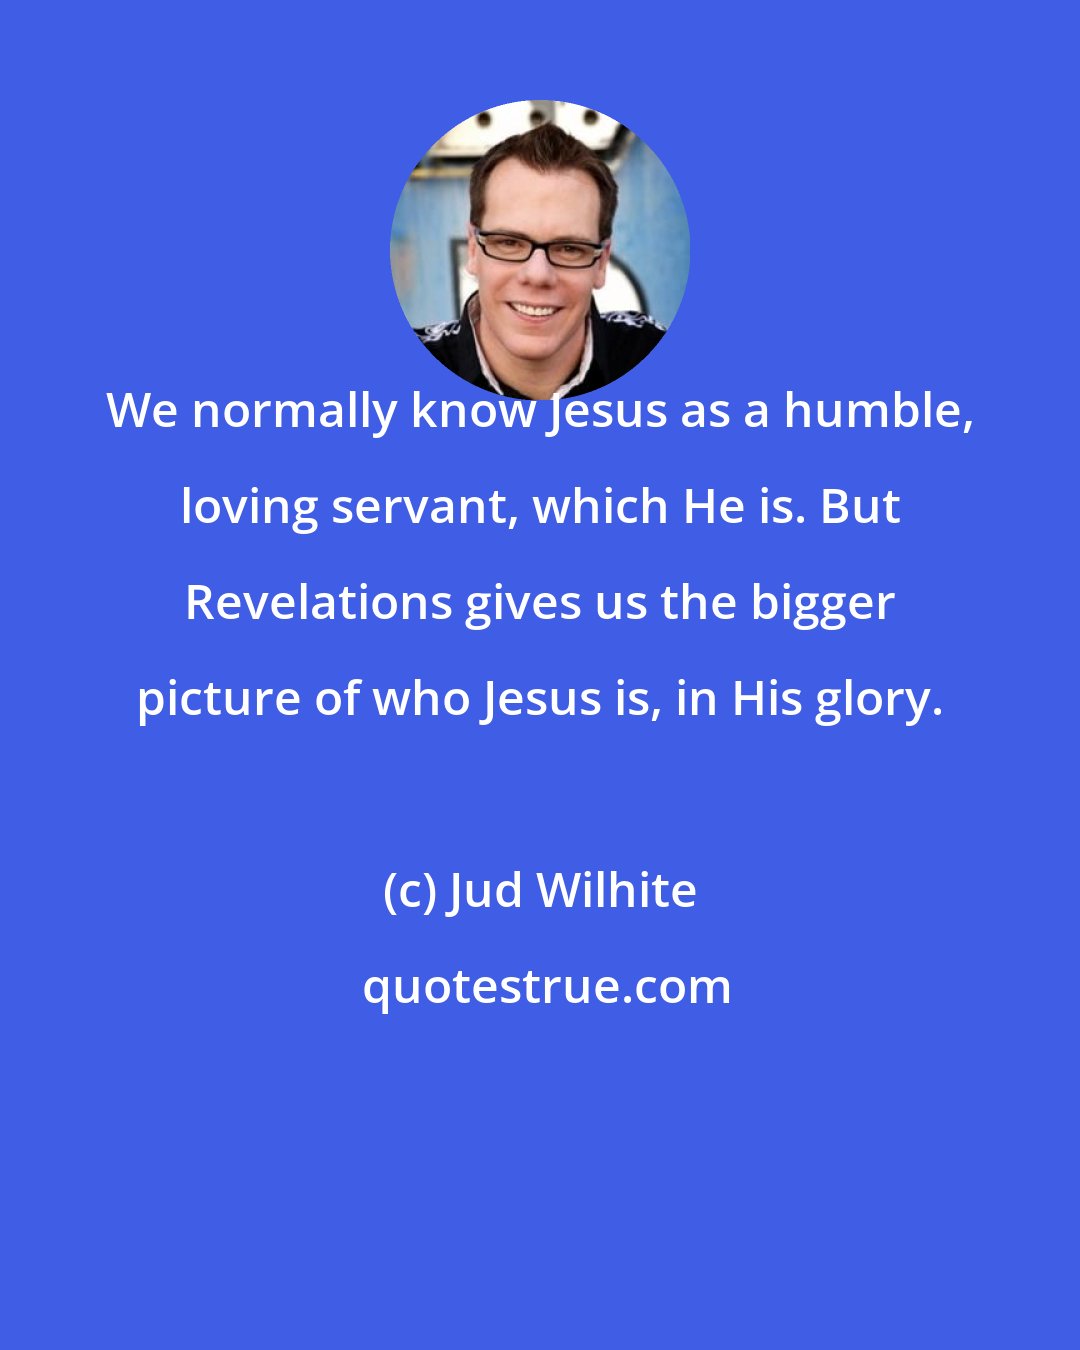 Jud Wilhite: We normally know Jesus as a humble, loving servant, which He is. But Revelations gives us the bigger picture of who Jesus is, in His glory.